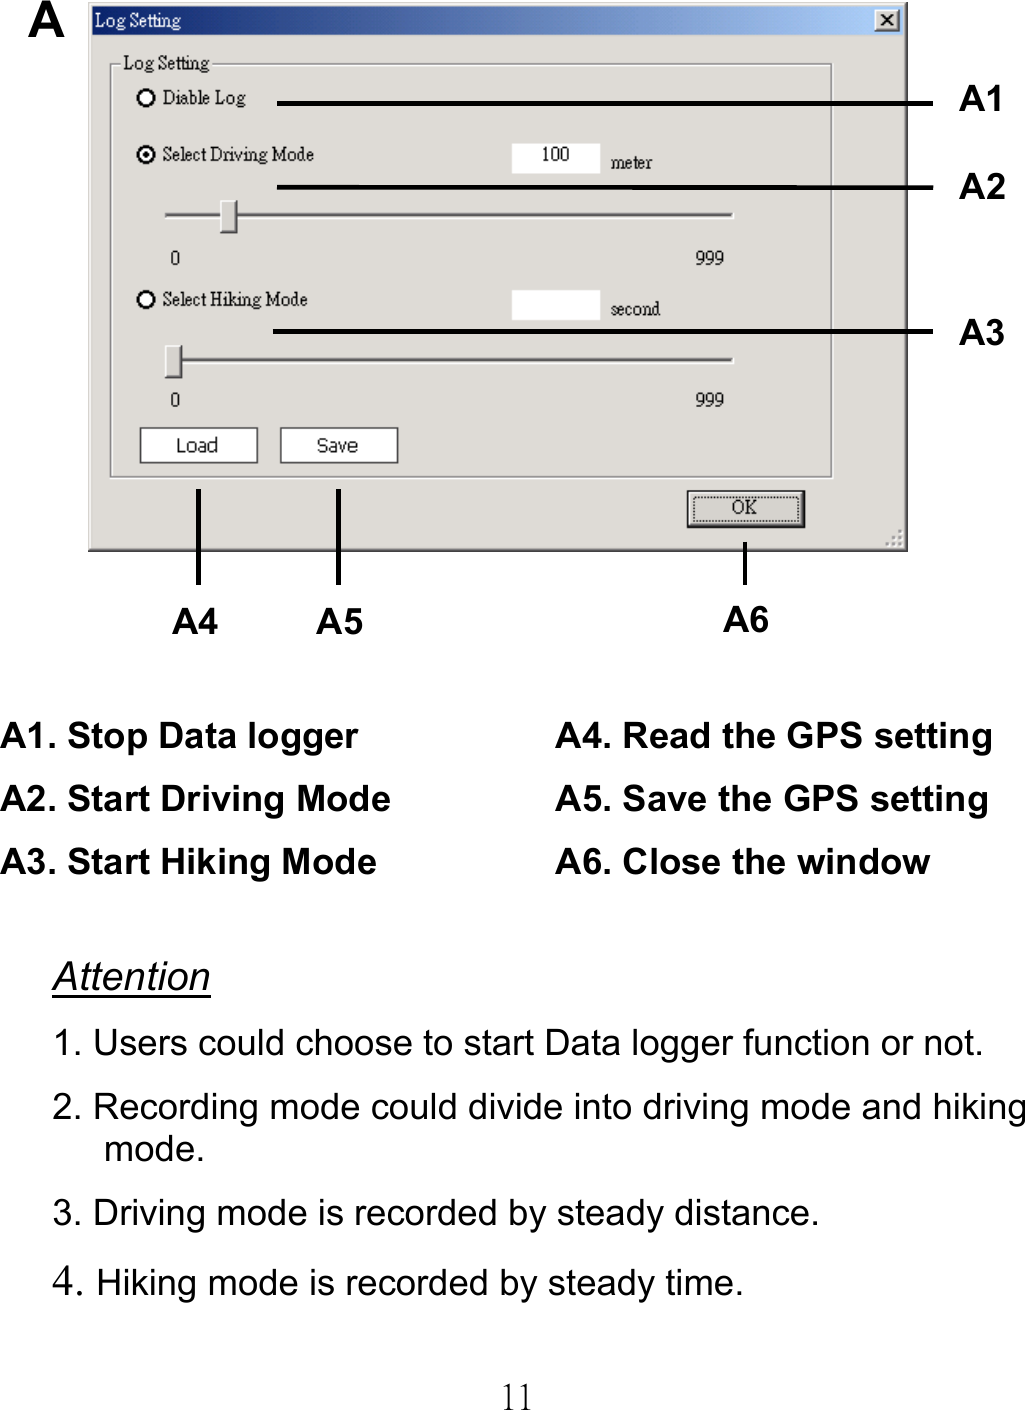  11    A1. Stop Data logger A2. Start Driving Mode A3. Start Hiking Mode  A4. Read the GPS setting A5. Save the GPS setting A6. Close the window Attention 1. Users could choose to start Data logger function or not. 2. Recording mode could divide into driving mode and hiking       mode.  3. Driving mode is recorded by steady distance.   4. Hiking mode is recorded by steady time.  A1A2A3A5  A6A4 A 